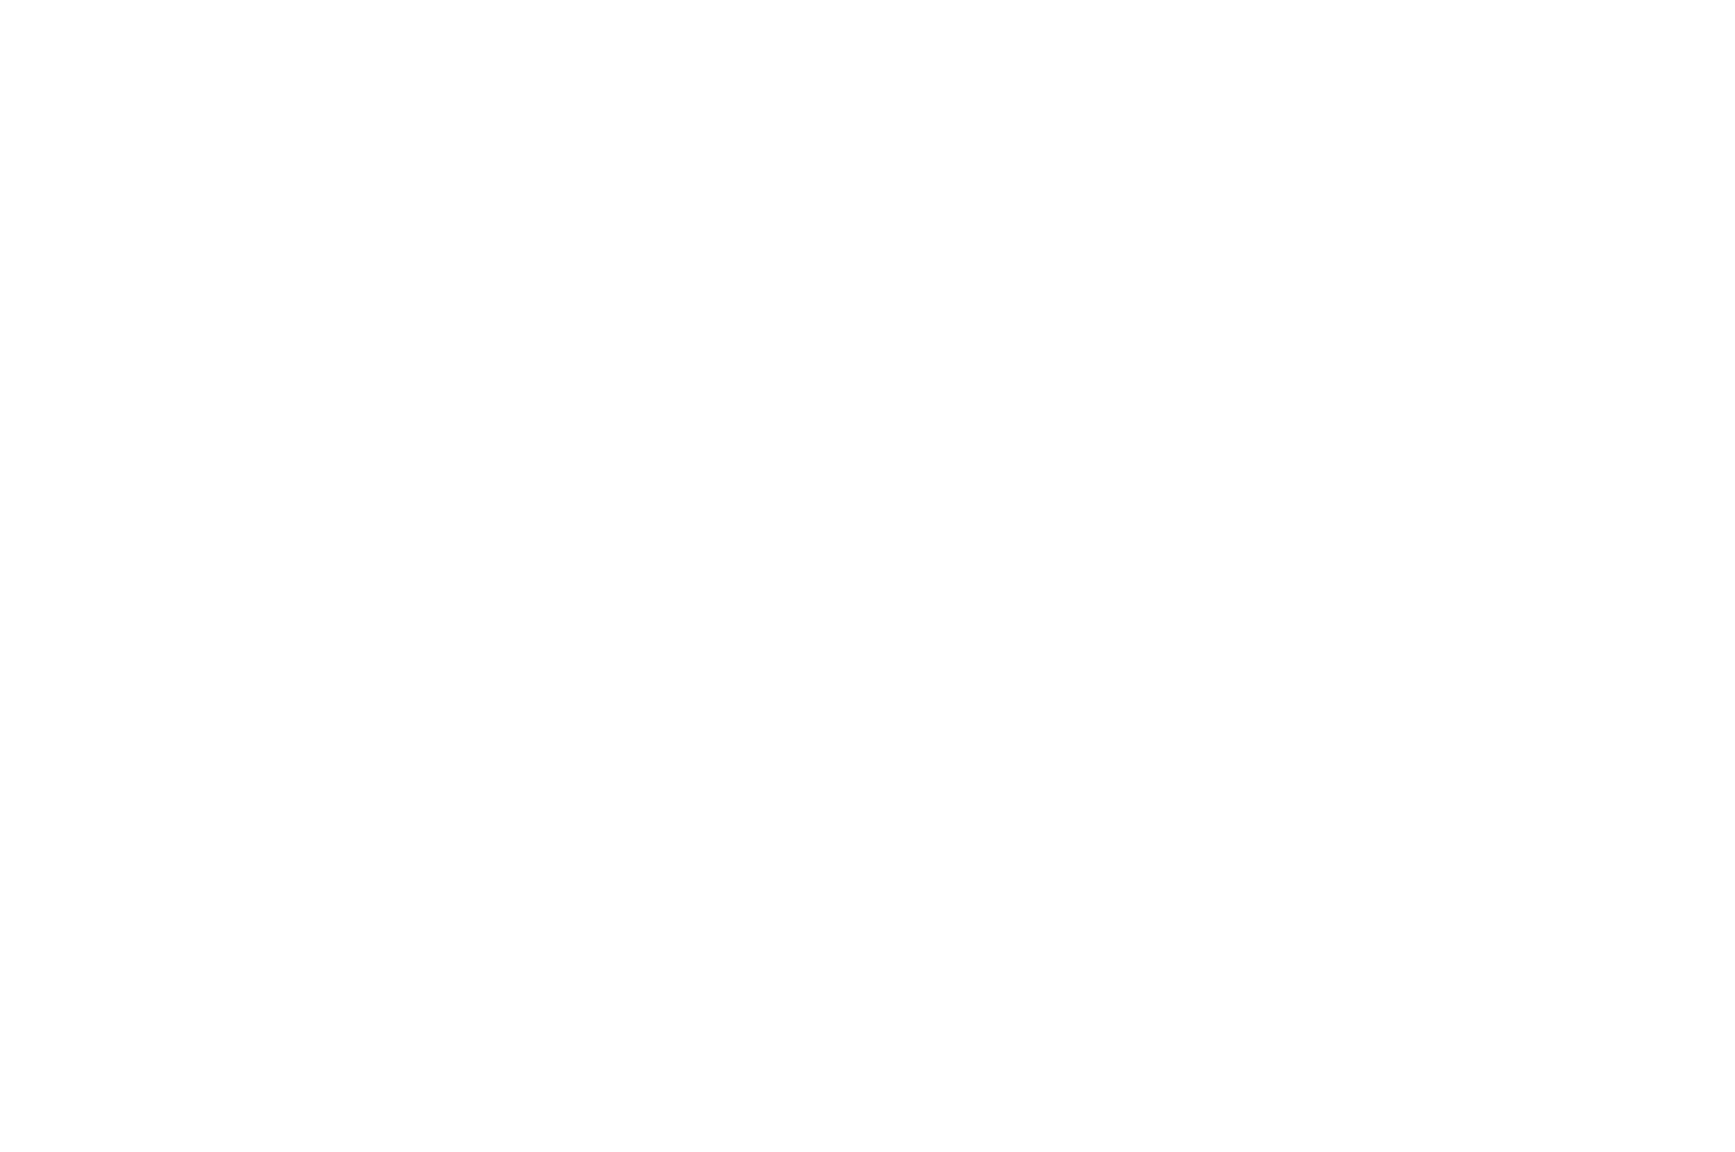 OFFICIAL SELECTION - Film Maudit - 2020.png